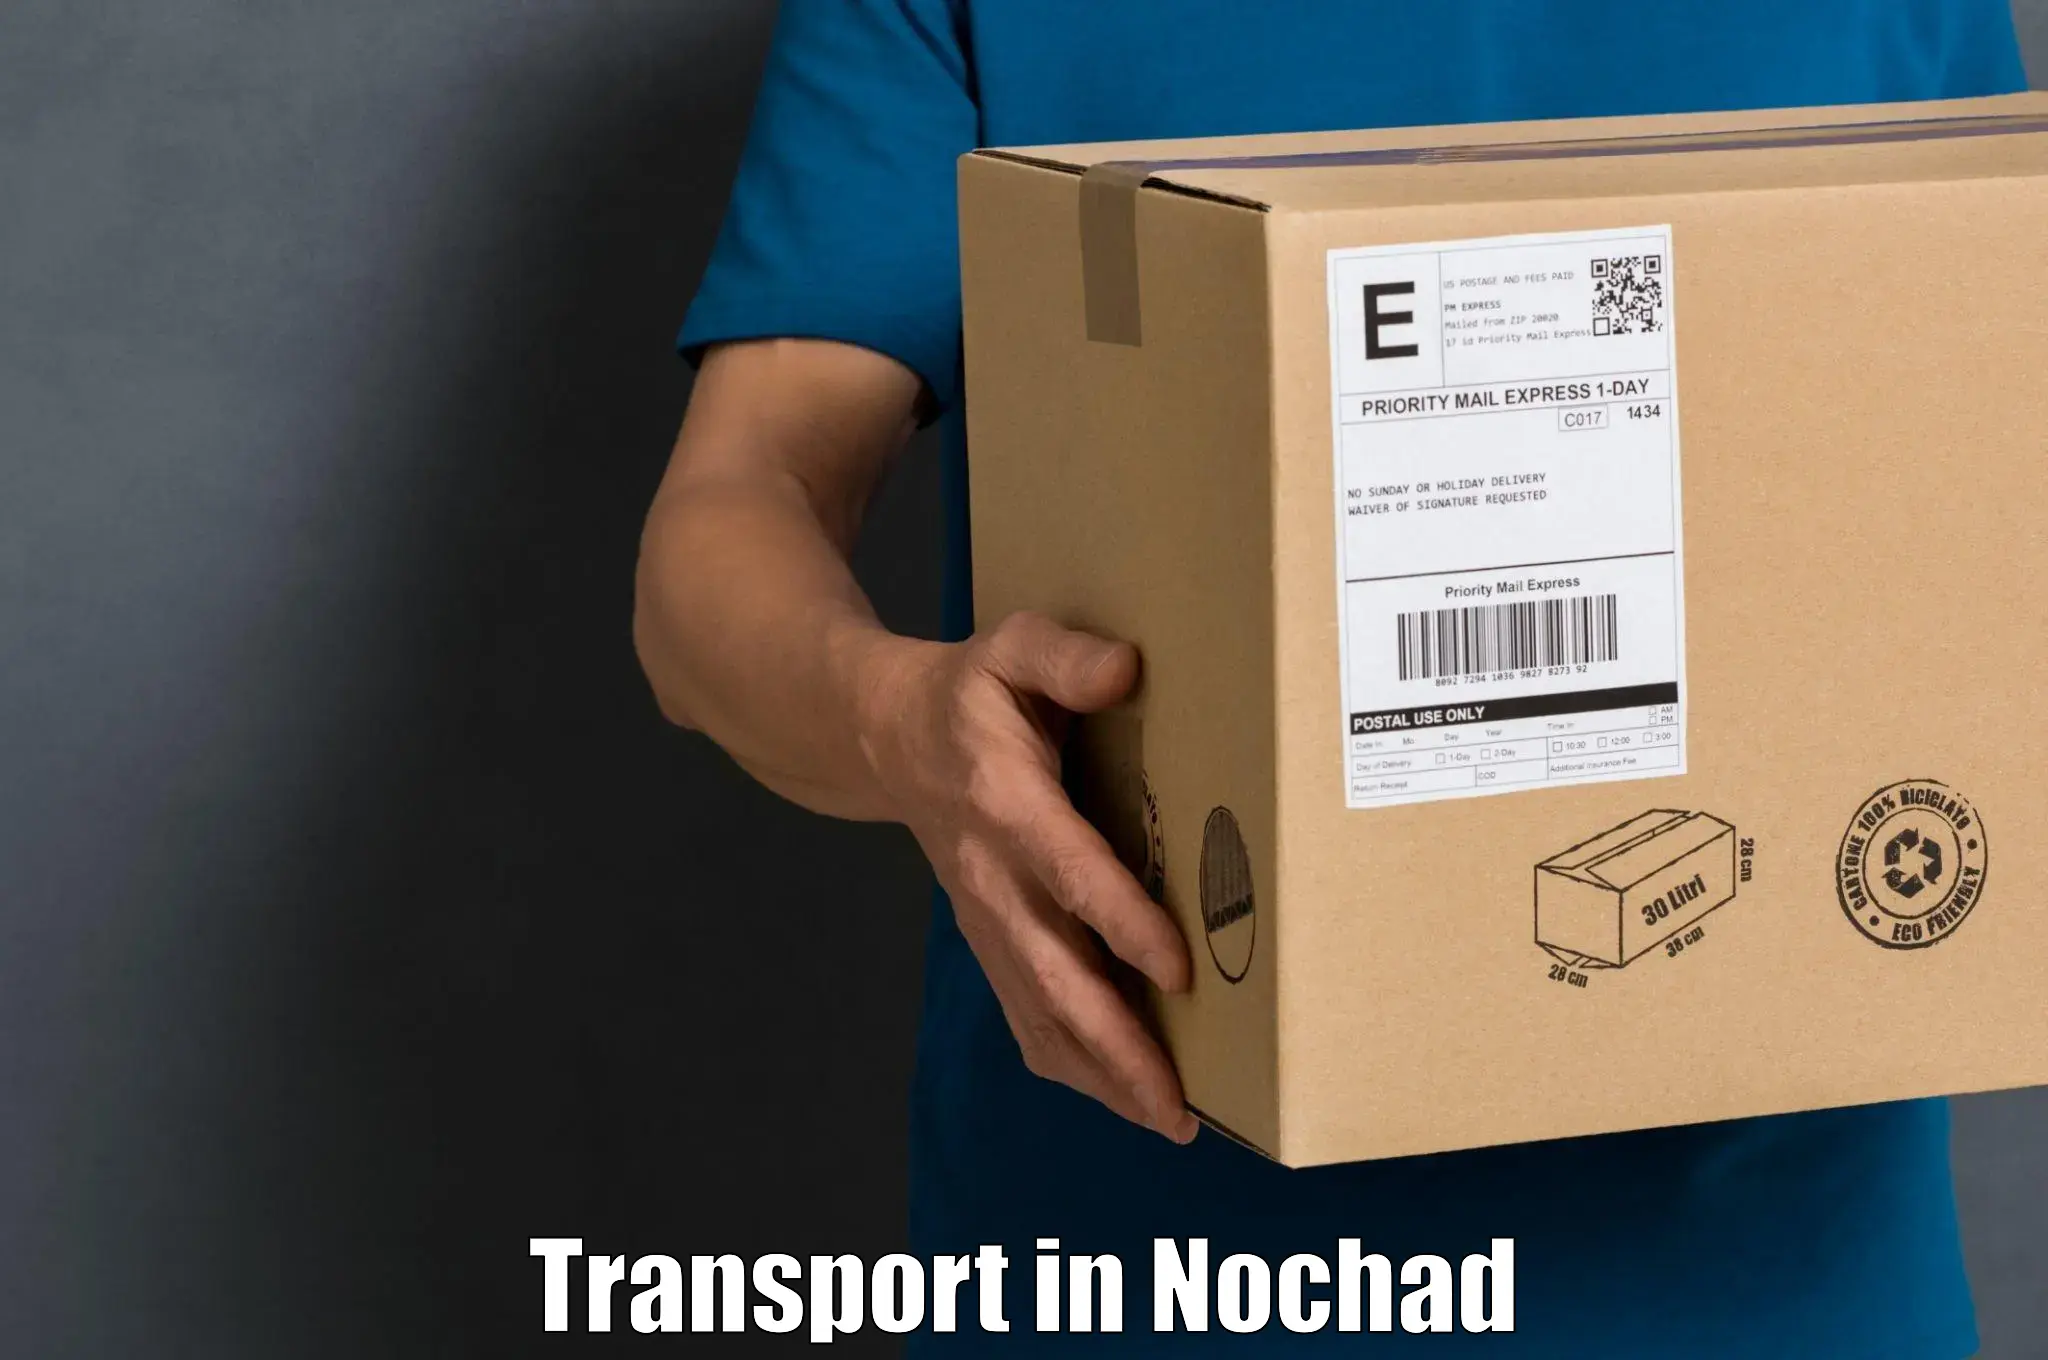 Road transport services in Nochad